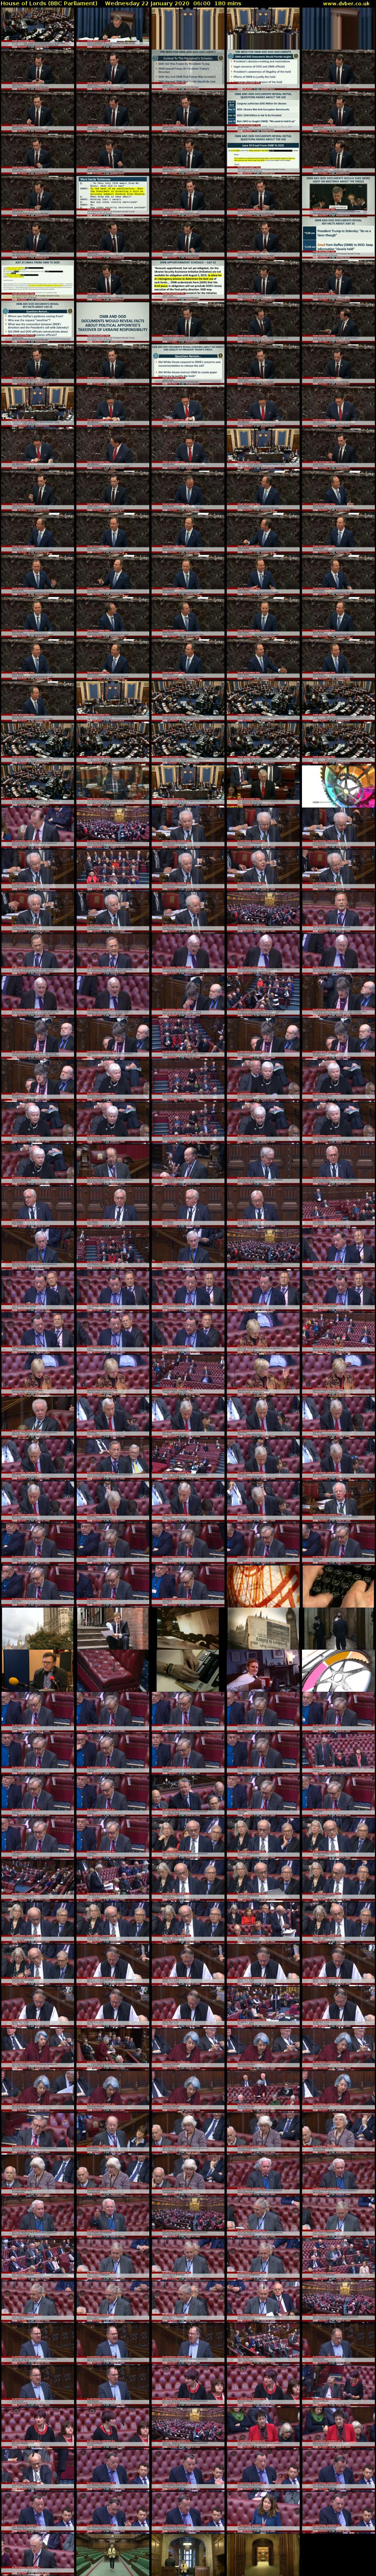 House of Lords (BBC Parliament) Wednesday 22 January 2020 06:00 - 09:00